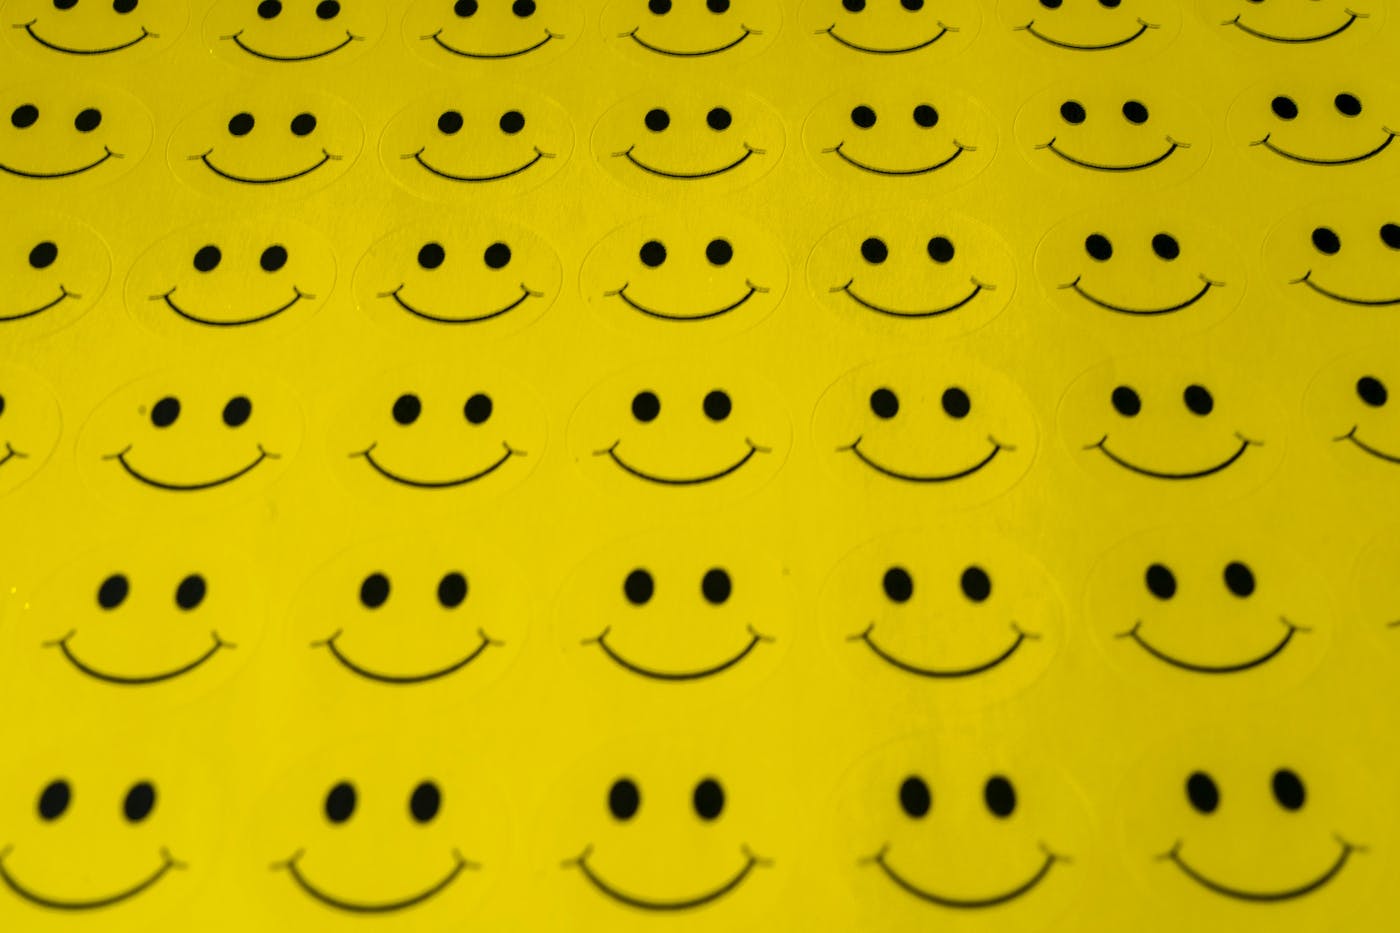 a page of smiley face stickers